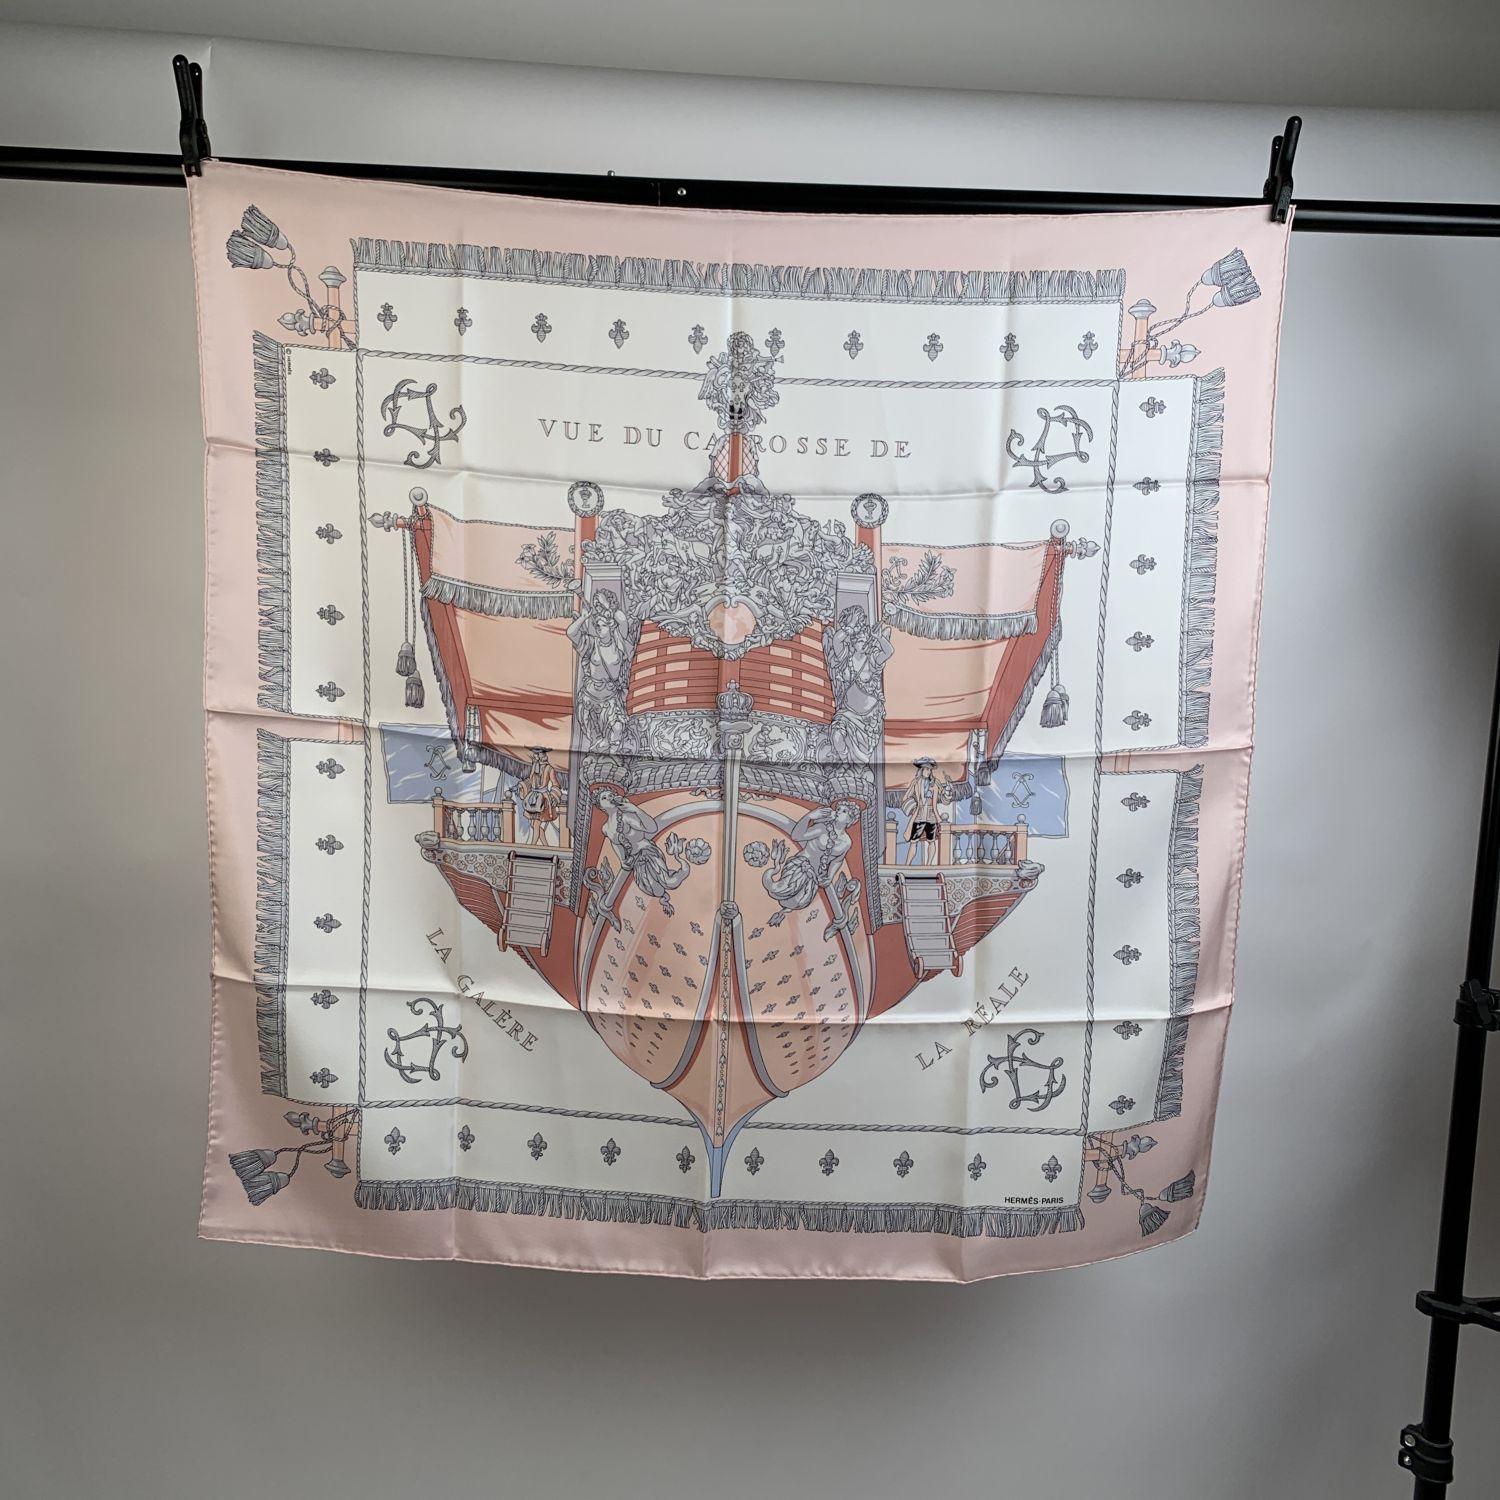 HERMES silk scarf 'La Reale - Vue du Carrosse de la Galere' by Hugo Grygkar and originally issued in 1953. It is a truly classics of Hermes maison and it is issued constantly (1953, 1983, 1992, 2007). This design depicts Louis XIV's decorated